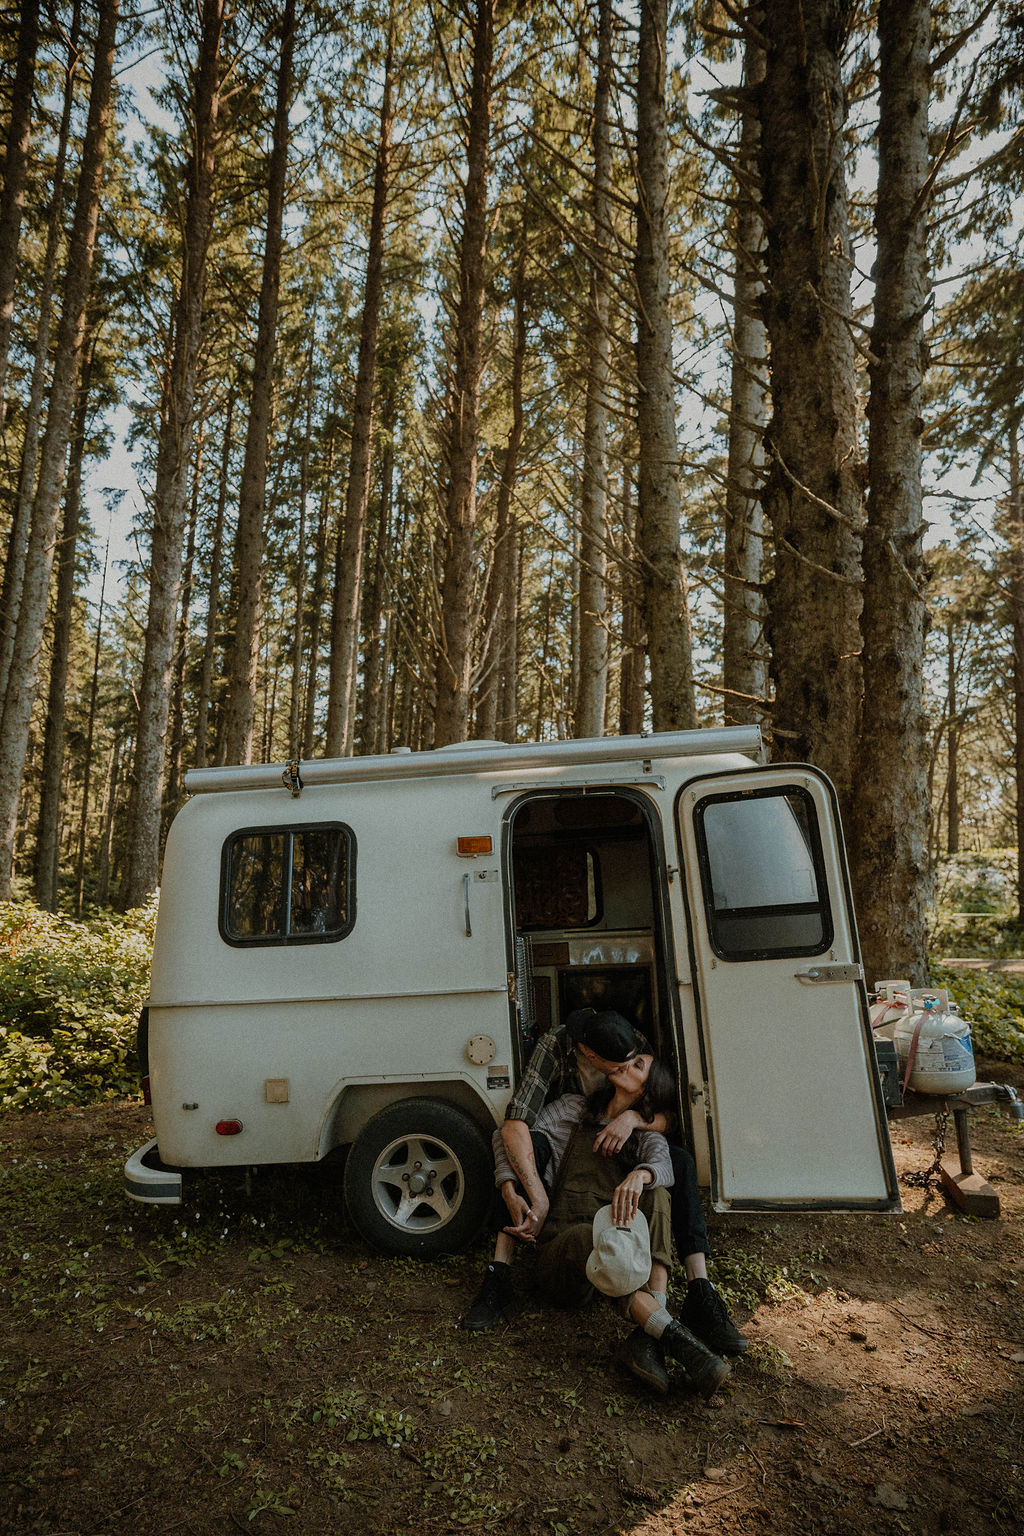 the couple standing sitting together in their camper